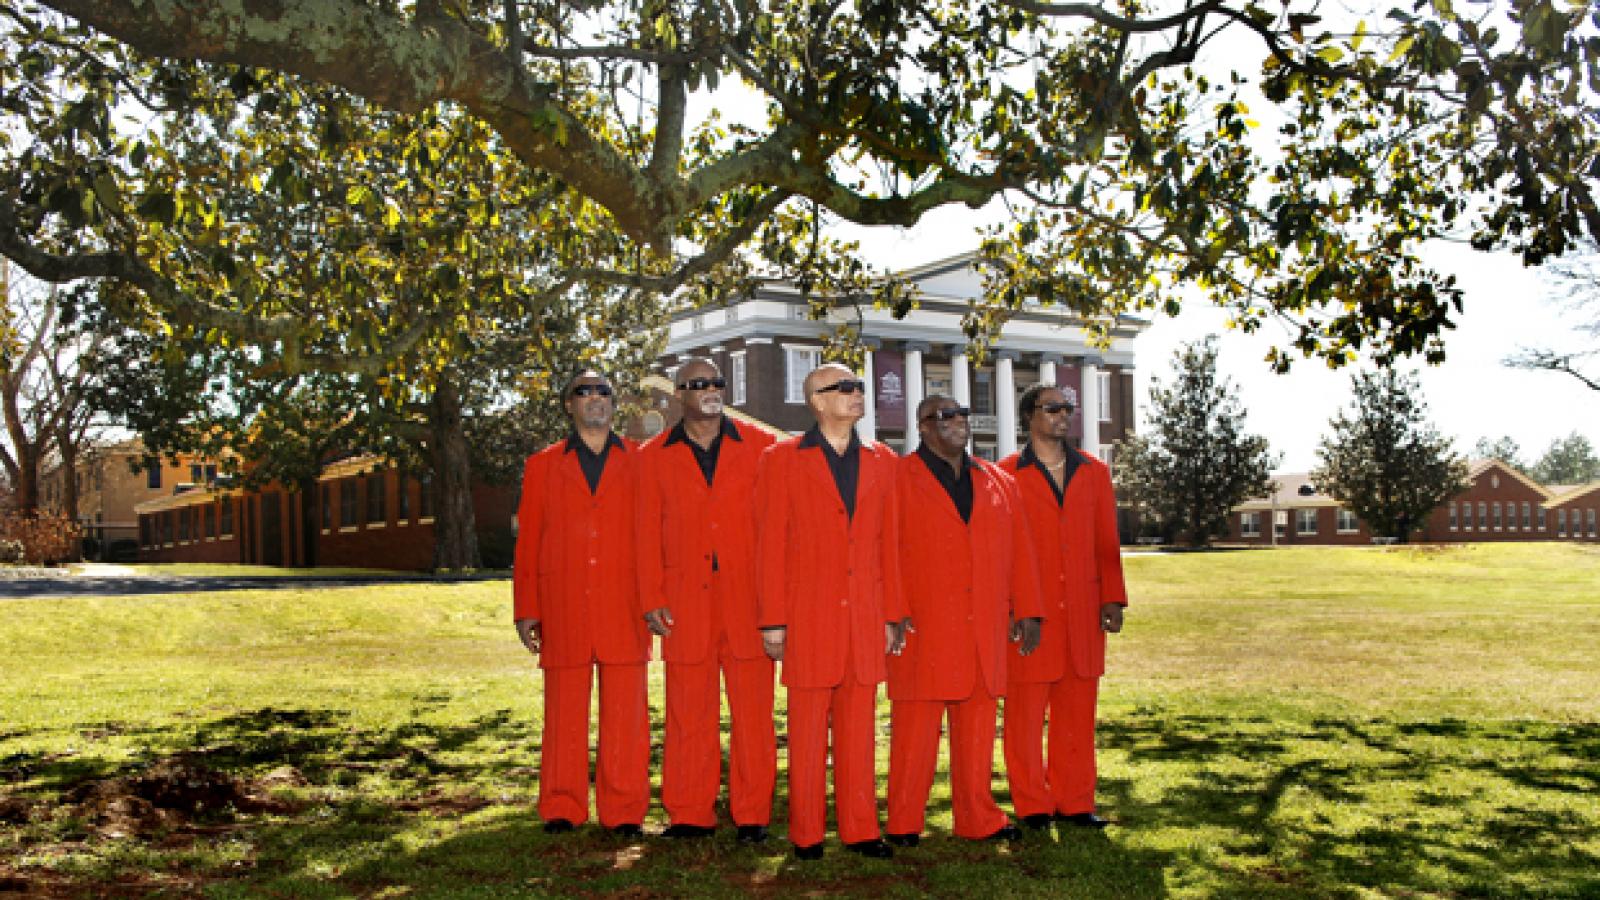 Five men wearing red suits stand outside wearing sunglasses